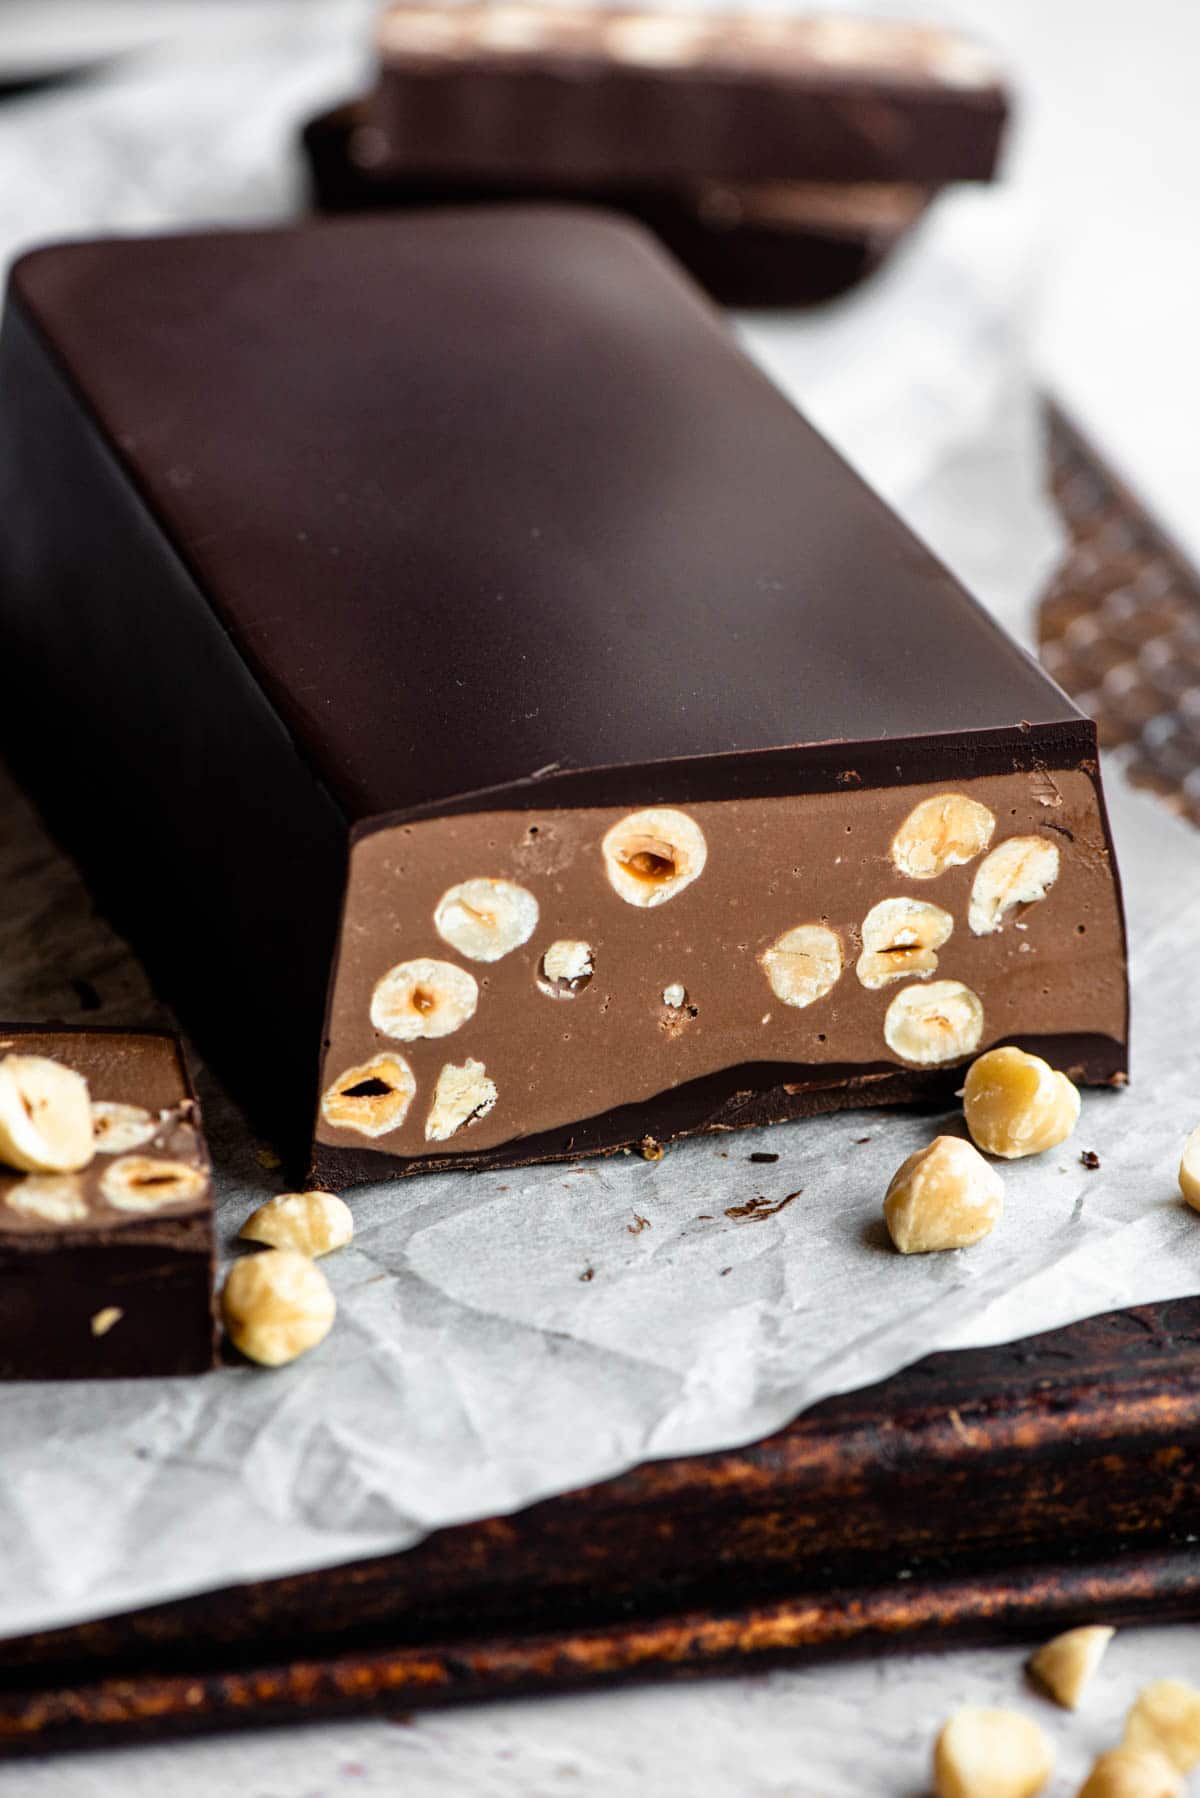 A chocolate torrone bar filled with hazelnuts sitting on baking parchment